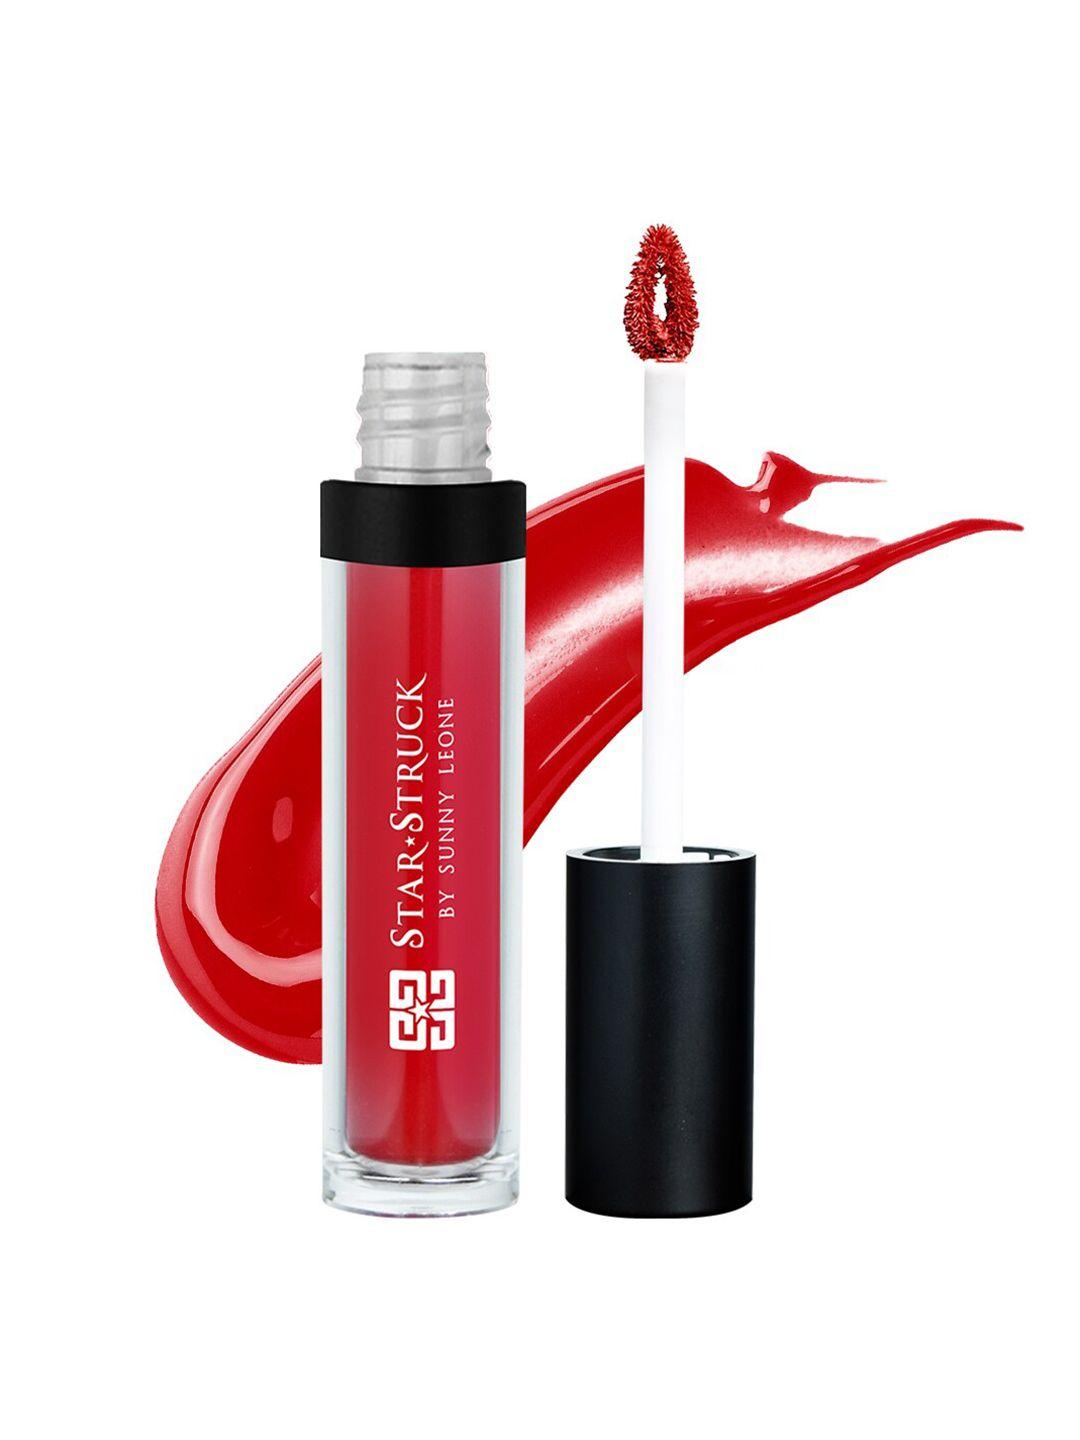 star struck by sunny leone hydrating glossy lip tint with hyaluronic acid 6ml - sassy red